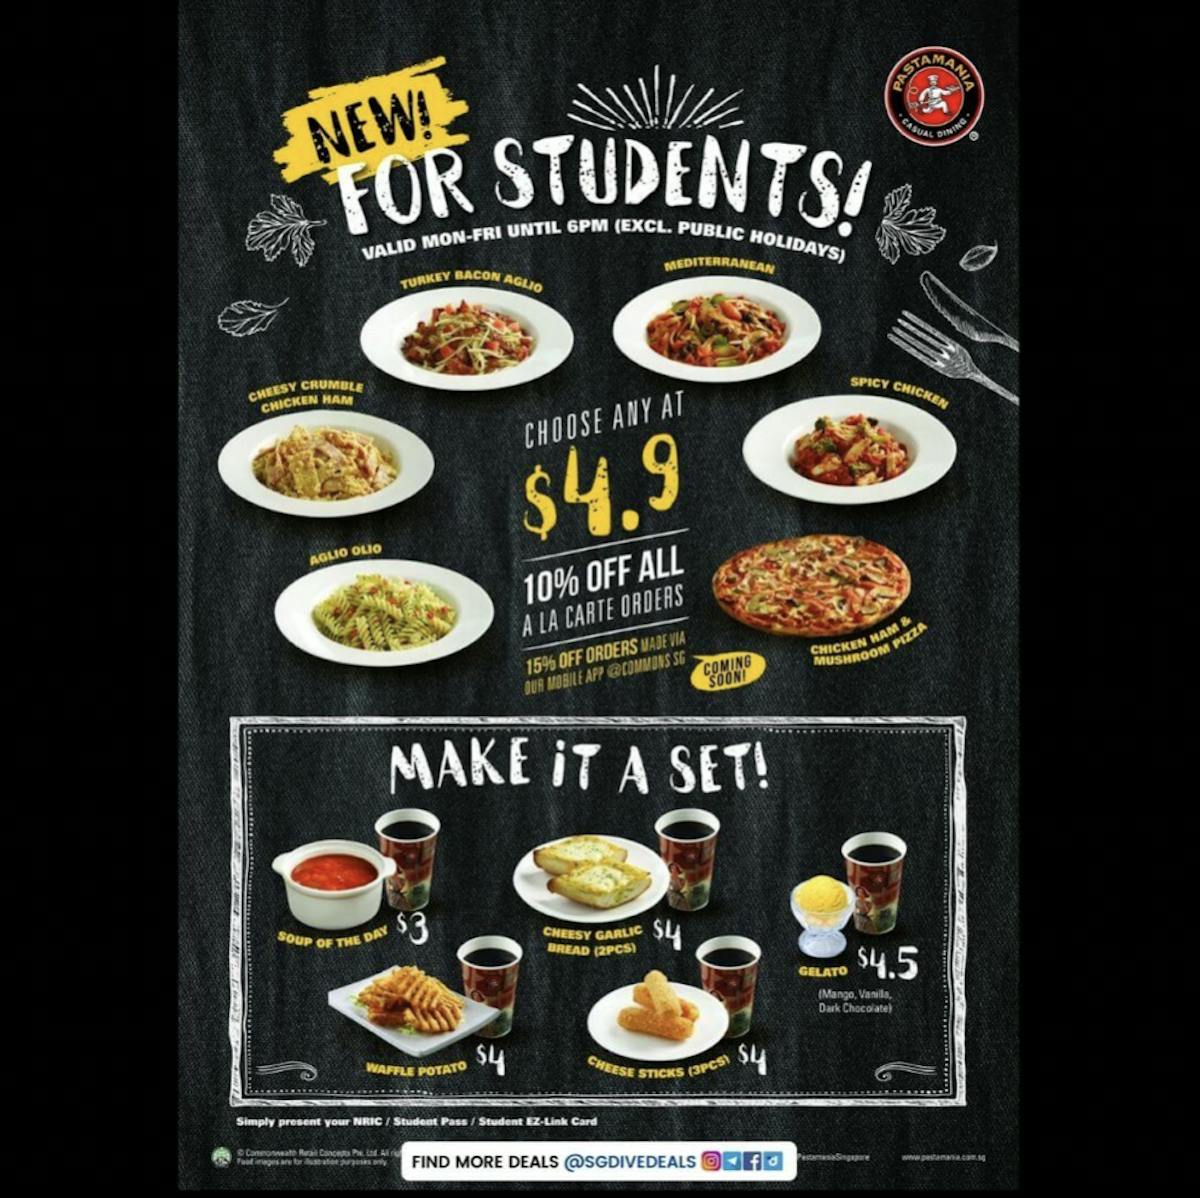 mains at $4.90 for students